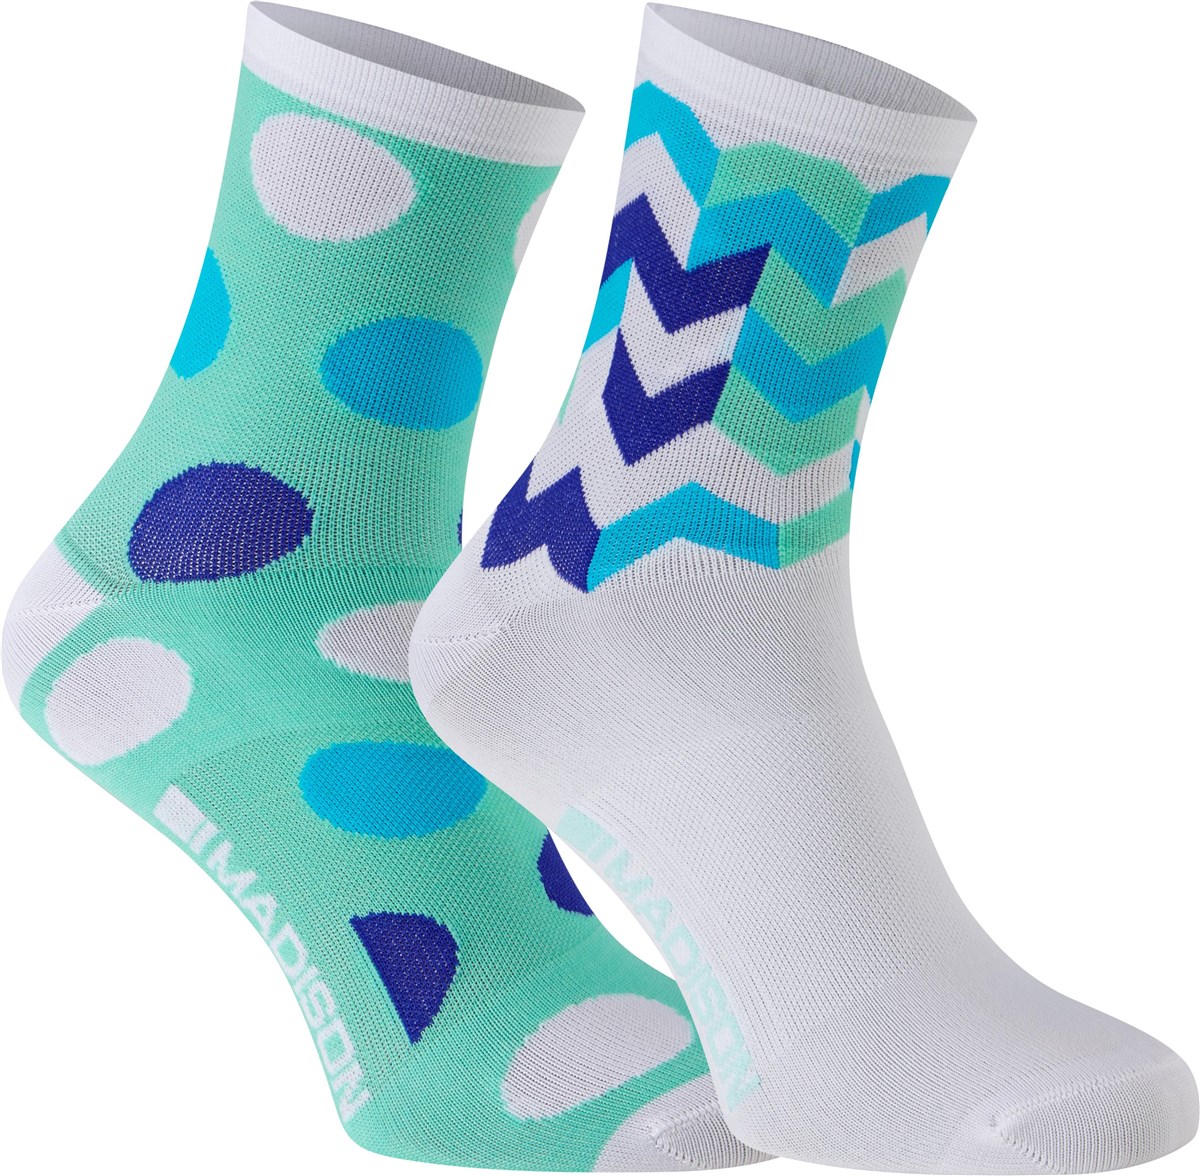 Madison Sportive Womens Mid Socks - Pack of 2